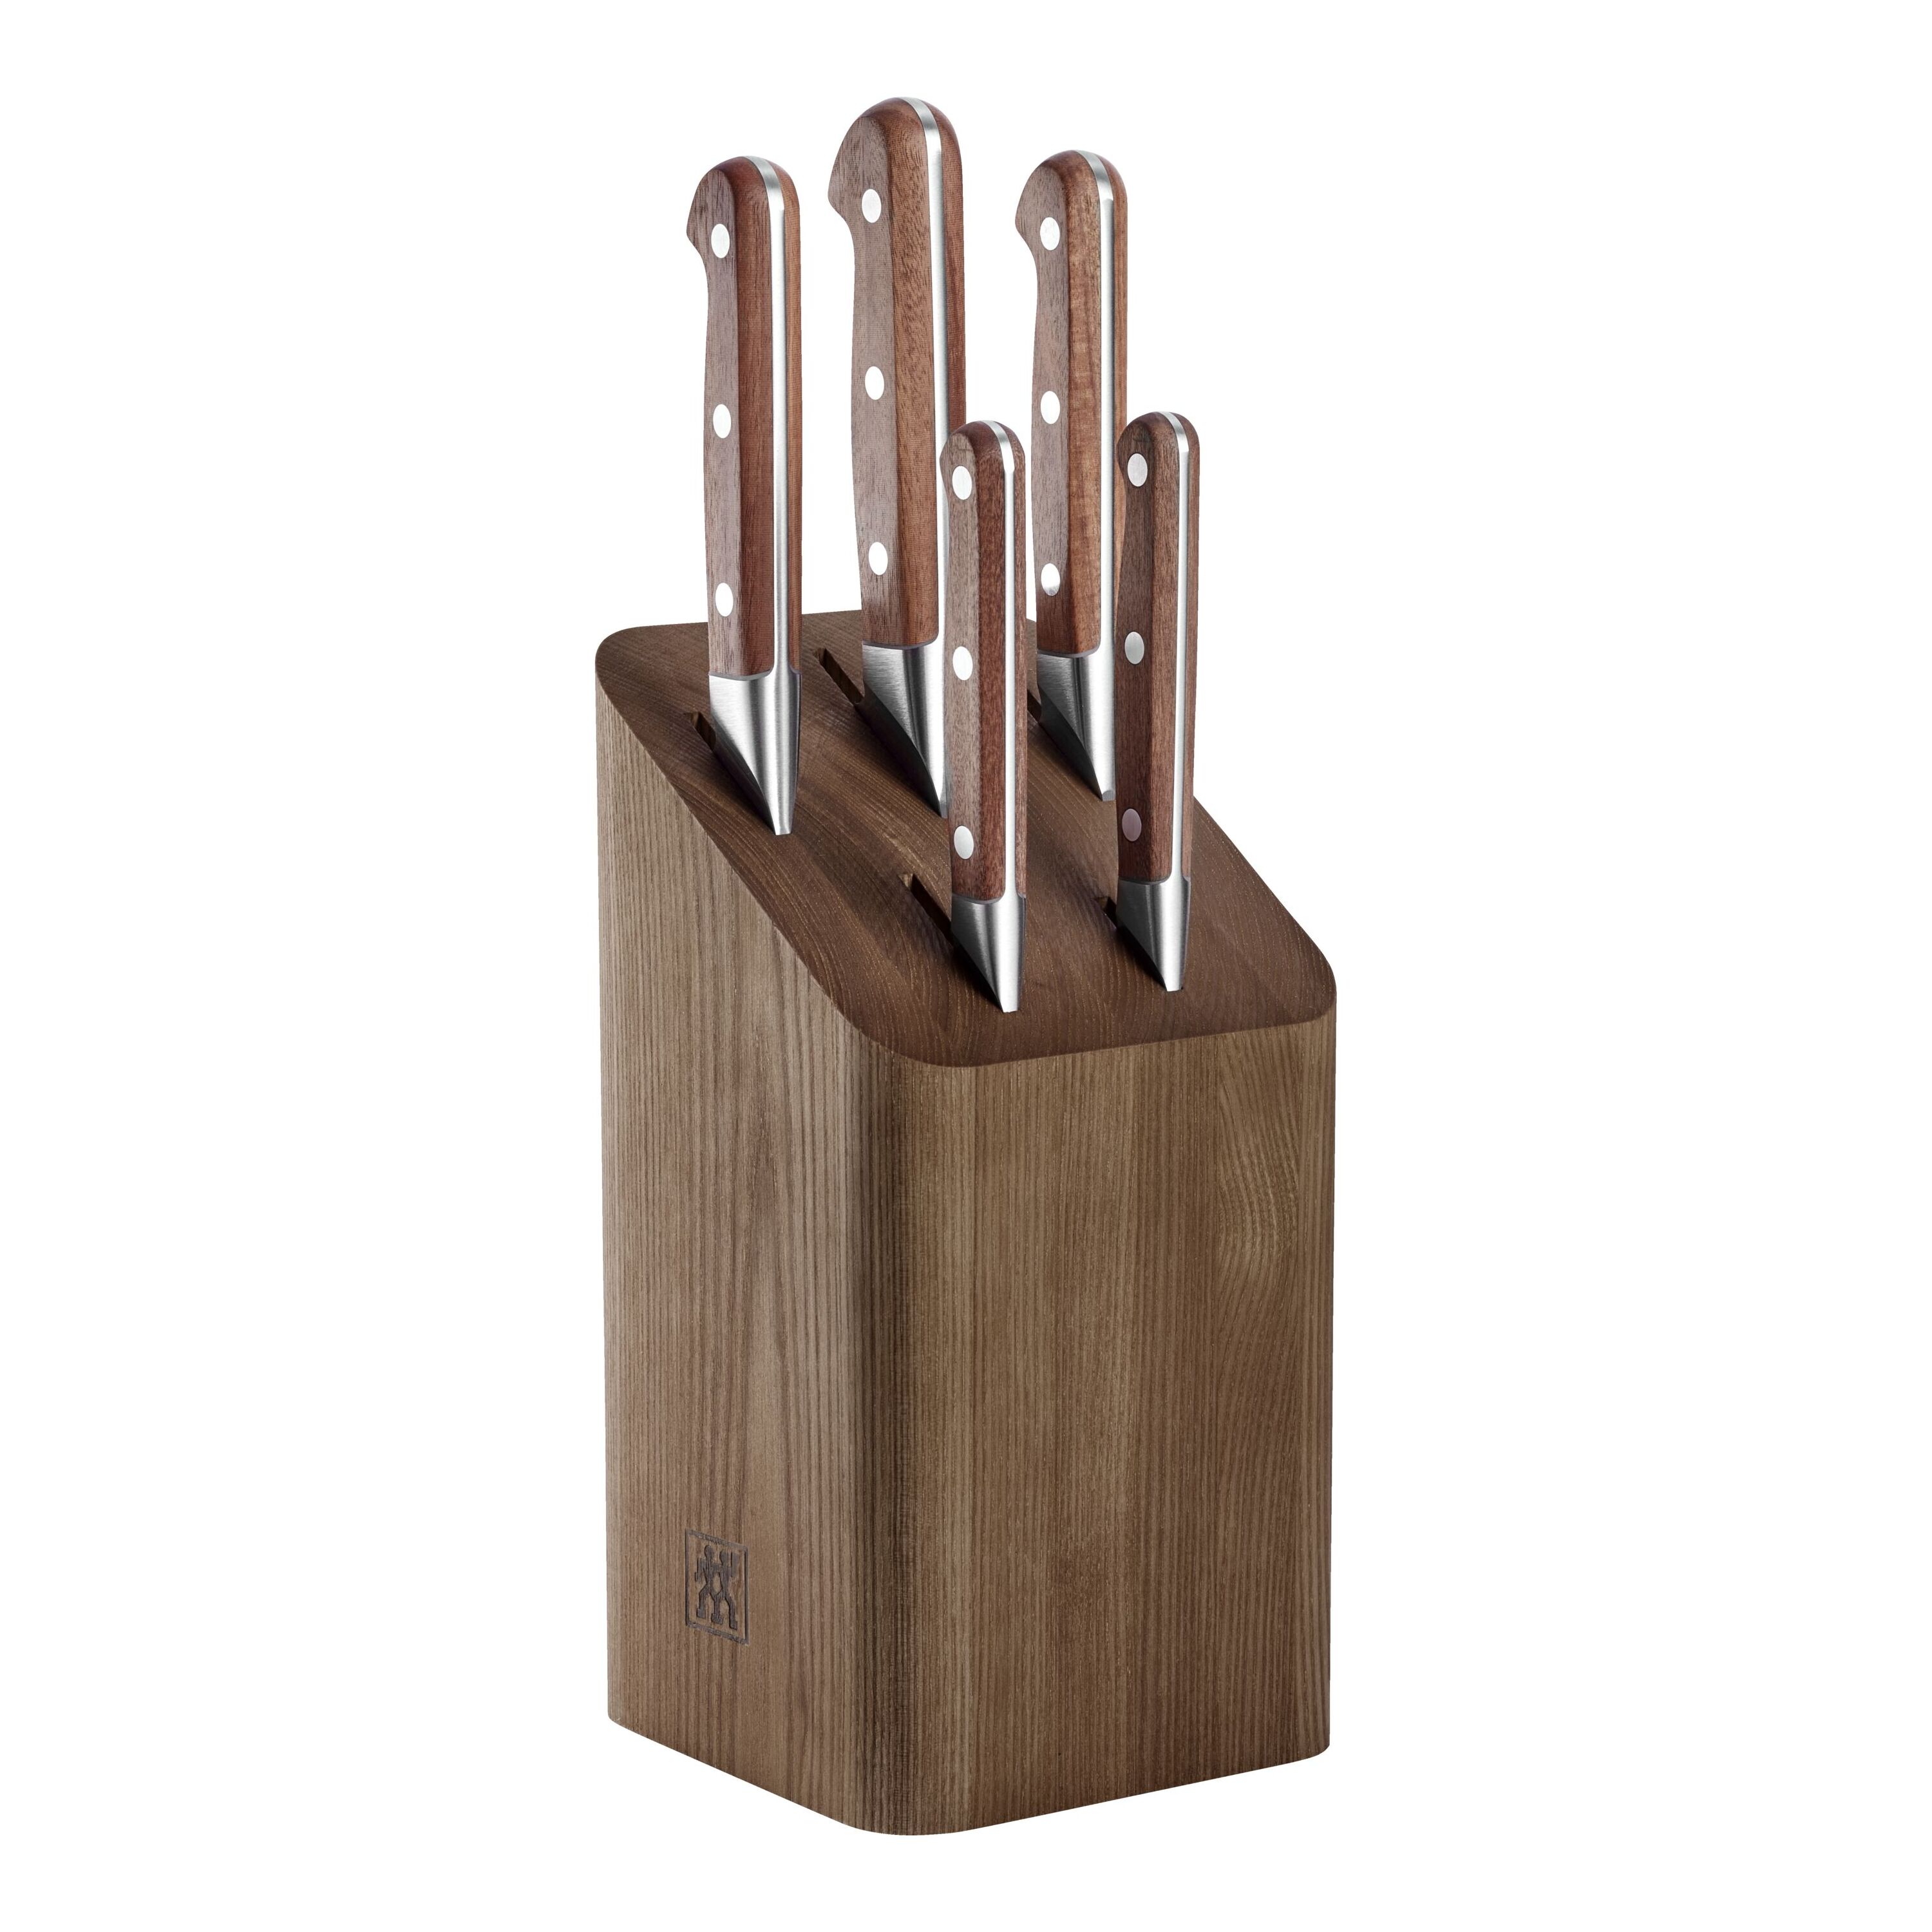 Buy ZWILLING Special Edition Knife block set | ZWILLING.COM